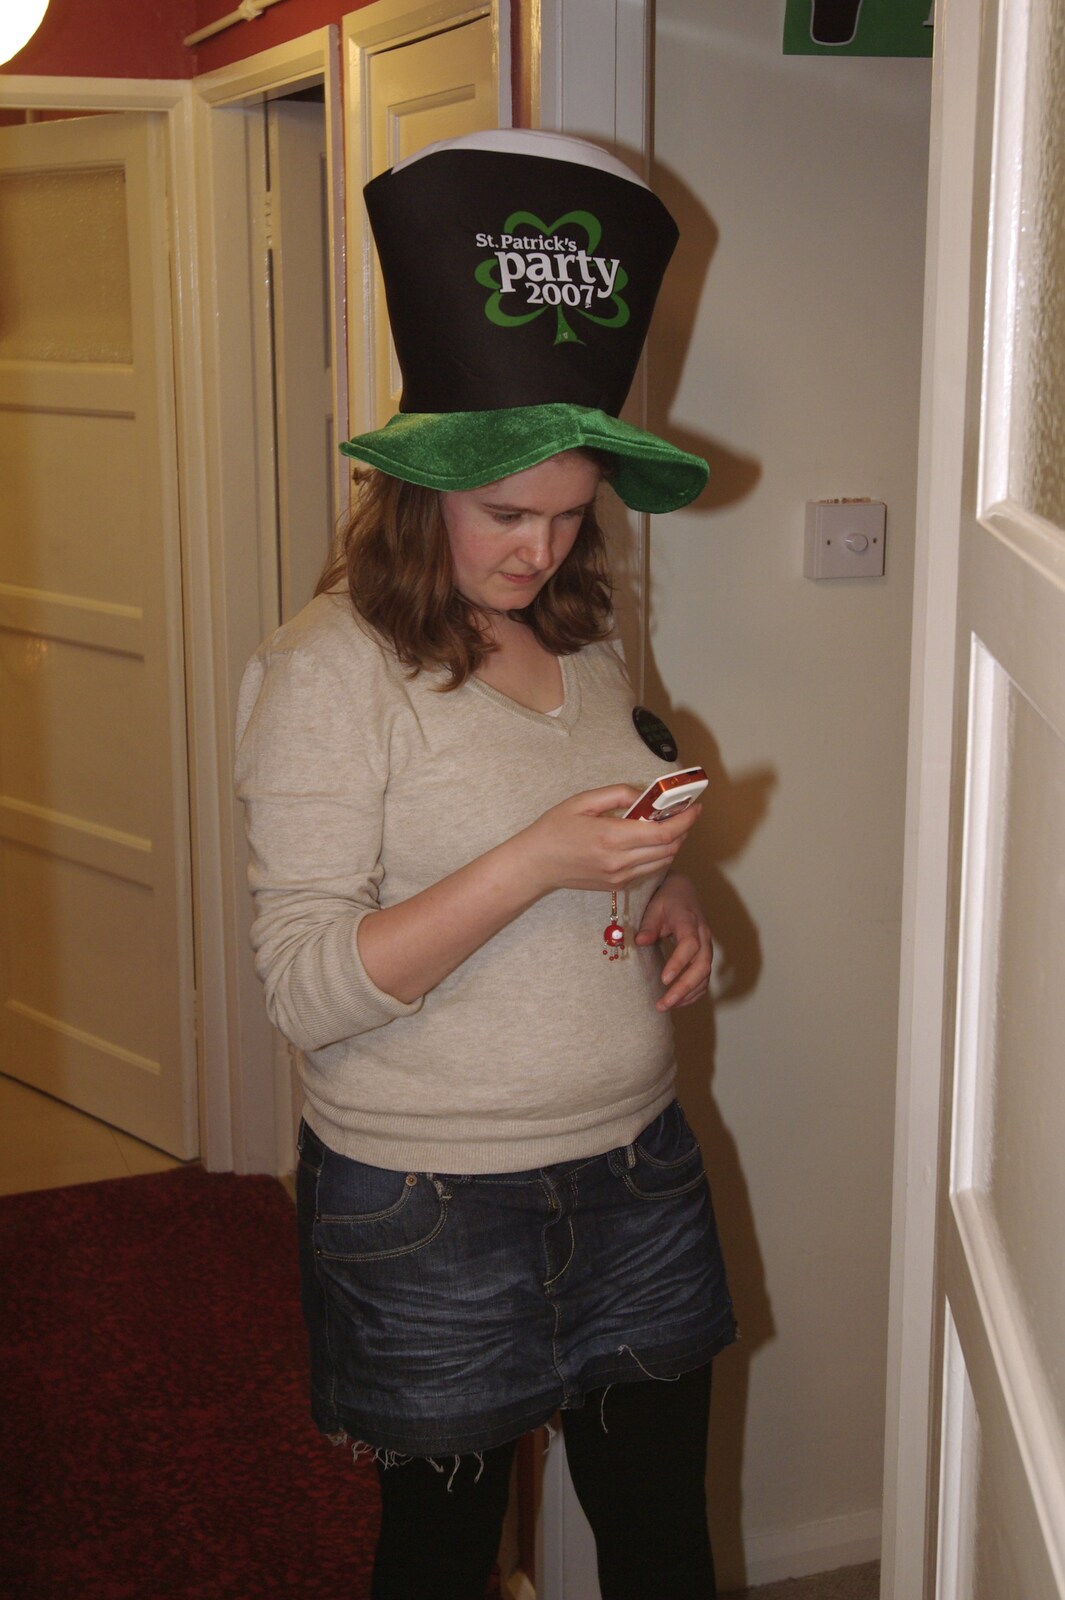 Isobel's House Warming, a Gospel Hall, and Derelict Newsagents, Ward Road, Cambridge - 17th March 2007: Isobel with novelty hat sends a text